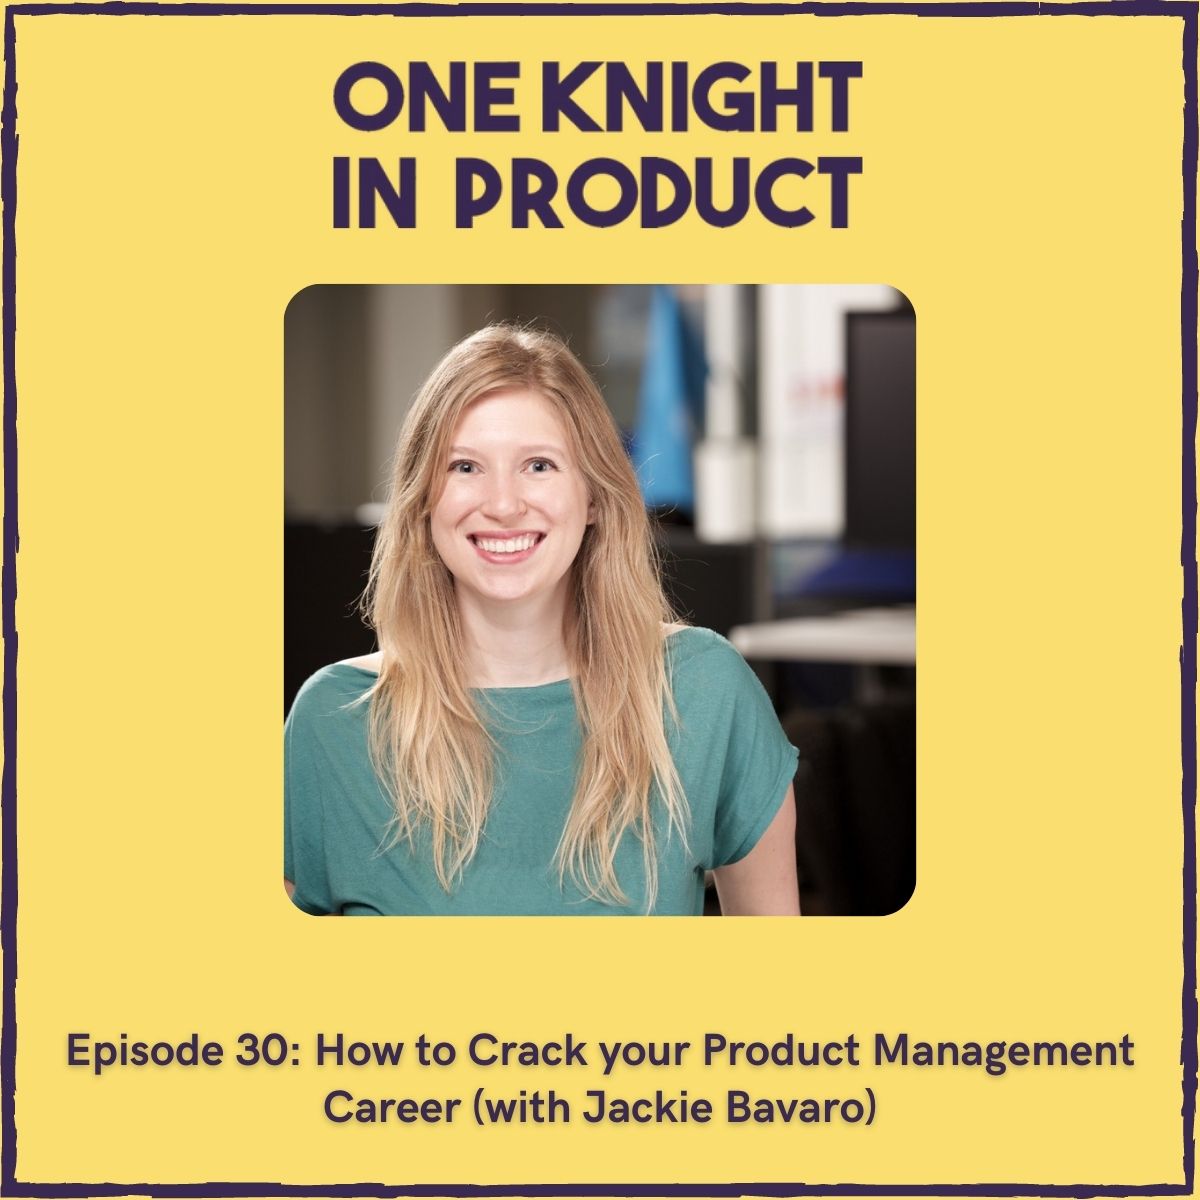 How to Crack your Product Management Career (with Jackie Bavaro, co-author of Cracking the PM Interview & Cracking the PM Career)